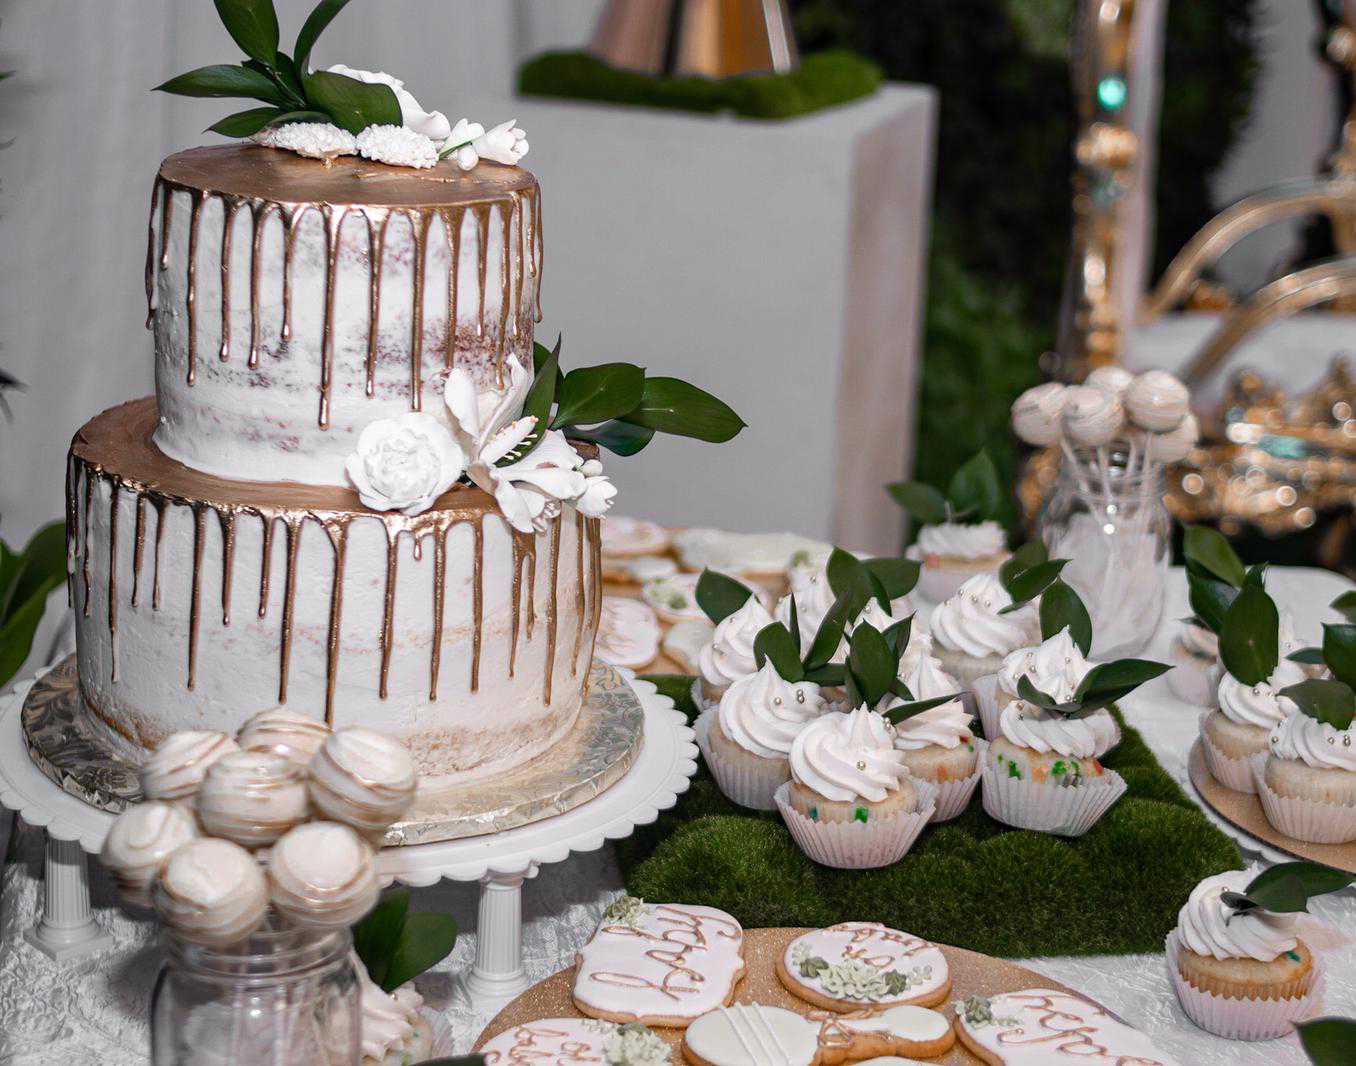 Elegant white and gold wedding cake alongside cupcakes, cookies and cake pops